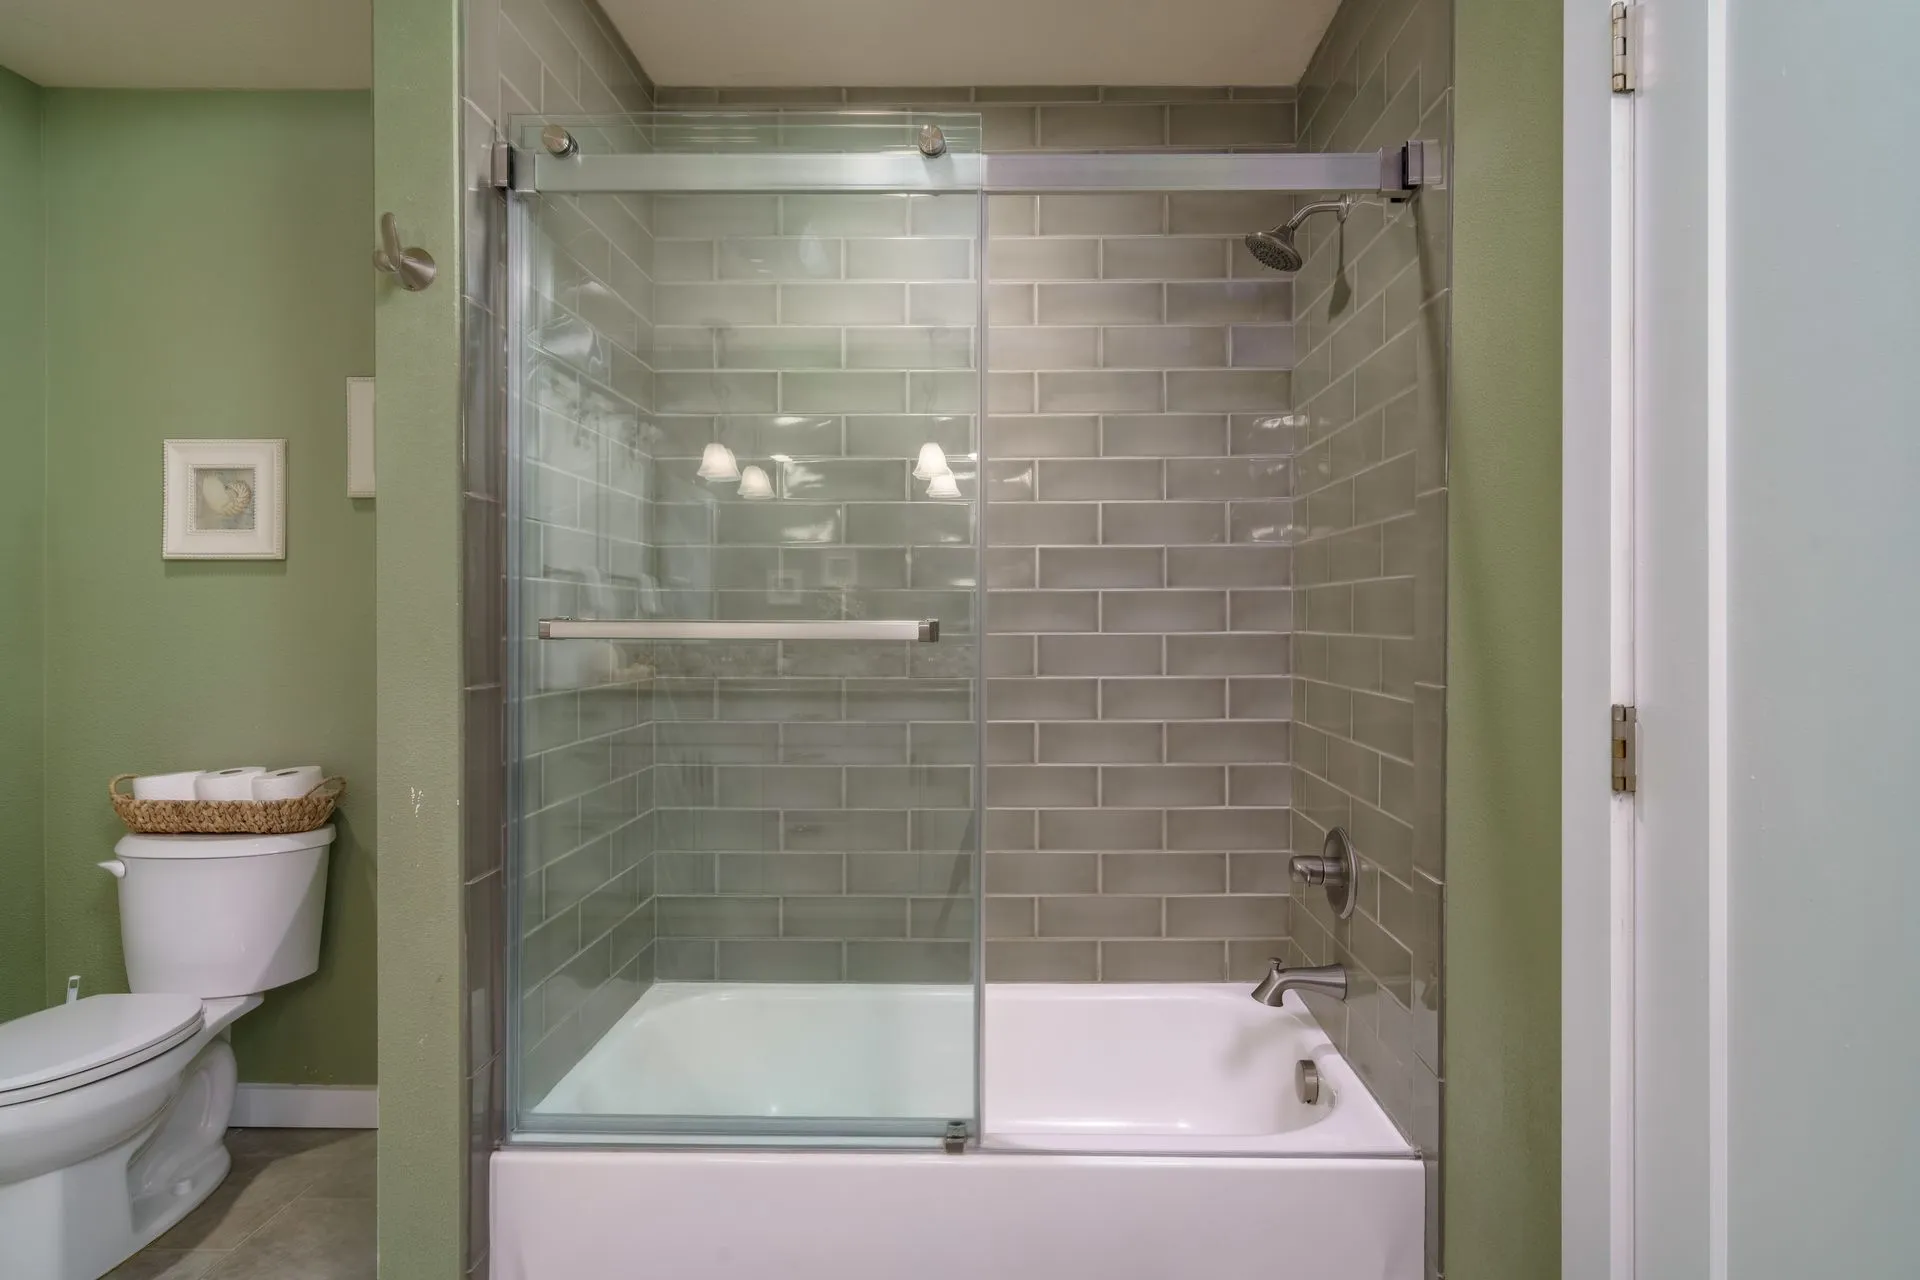 Vacation Rental in Cannon Beach, Anchor's Retreat bathroom with tub